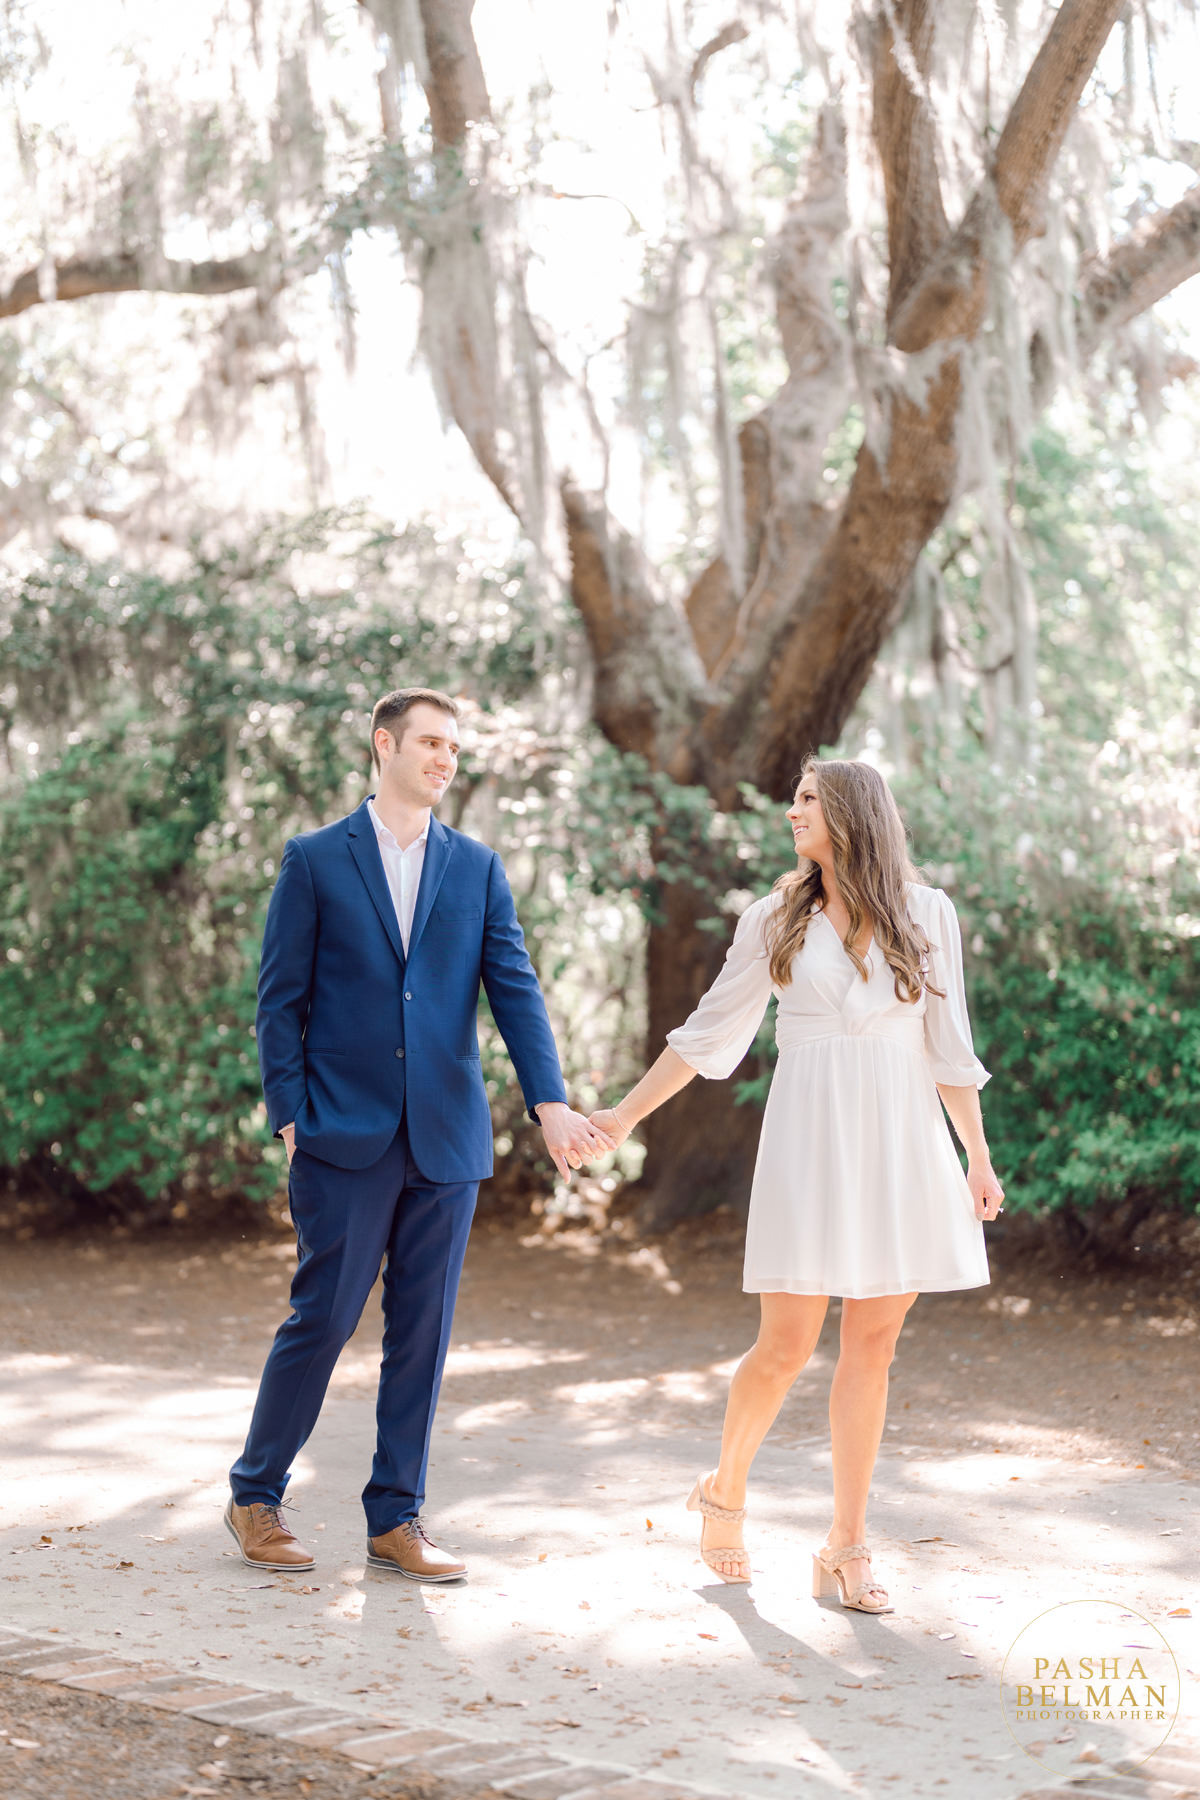 Engagement Pictures at Caledonia Golf & Fish Club in Pawleys Island